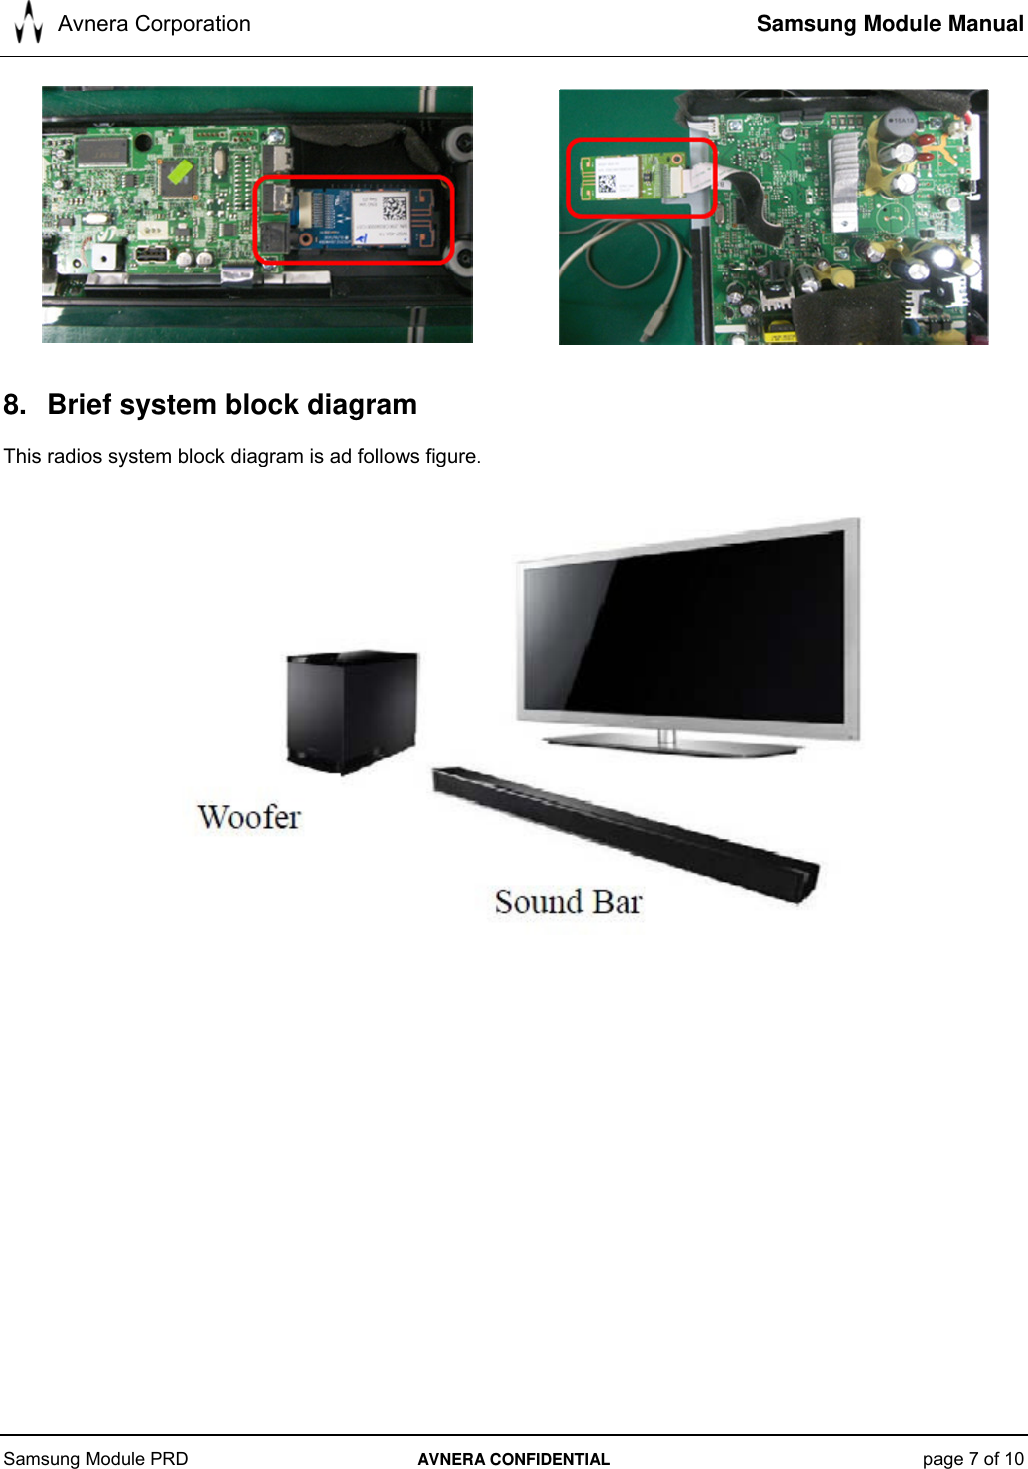 Avnera Corporation  Samsung Module Manual   Samsung Module PRD  AVNERA CONFIDENTIAL page 7 of 10    8. Brief system block diagram This radios system block diagram is ad follows figure.                         